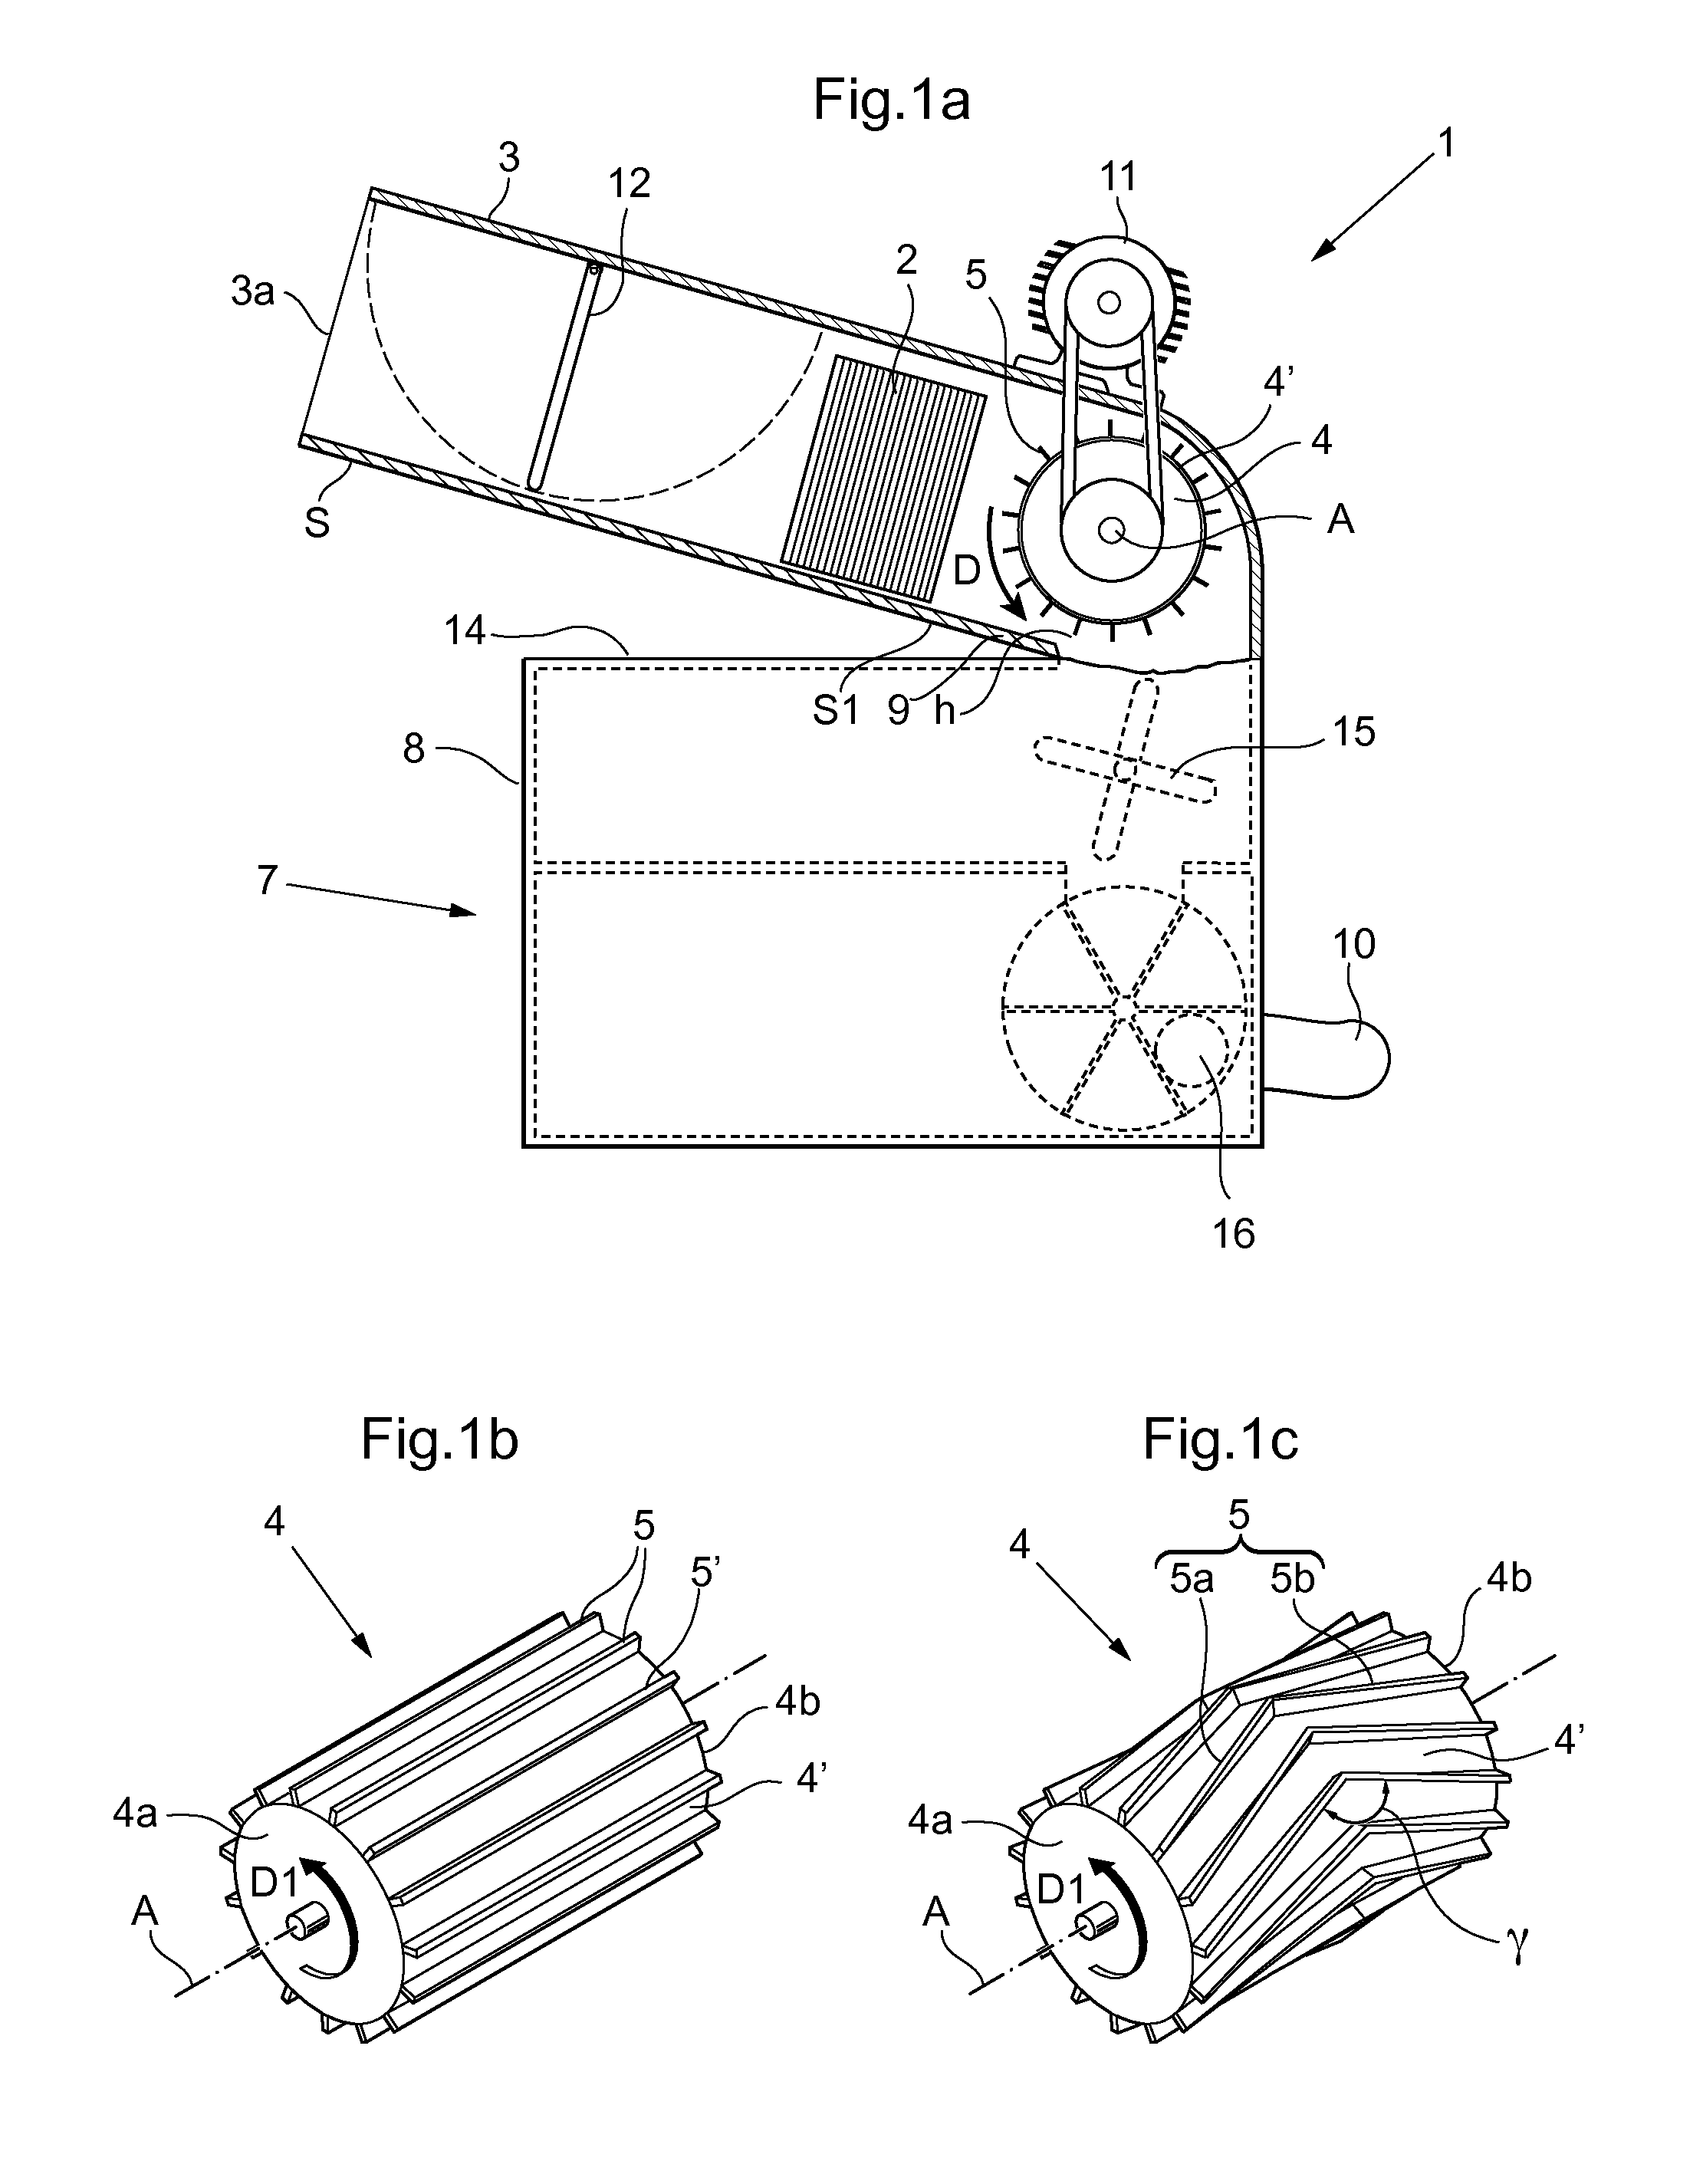 Device for dissolving compressed blocks of insulation, a loose fill insulation apparatus and a method for dissolving compressed blocks of insulation